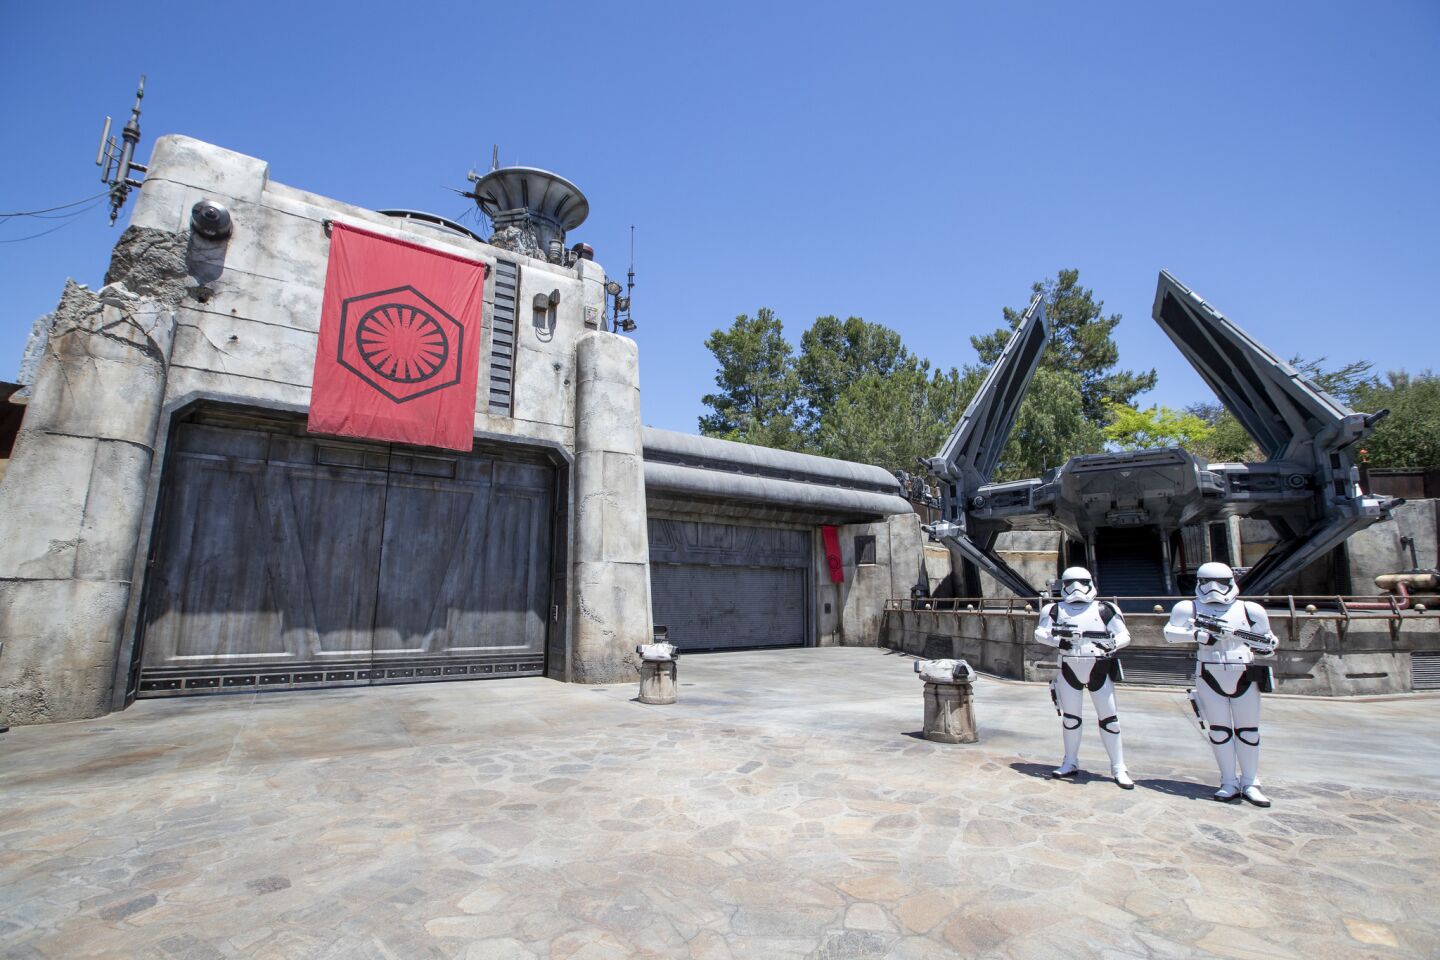 Storm Troopers patrol The First Order Outpost where the Tie Echelon fighter ship is parked.